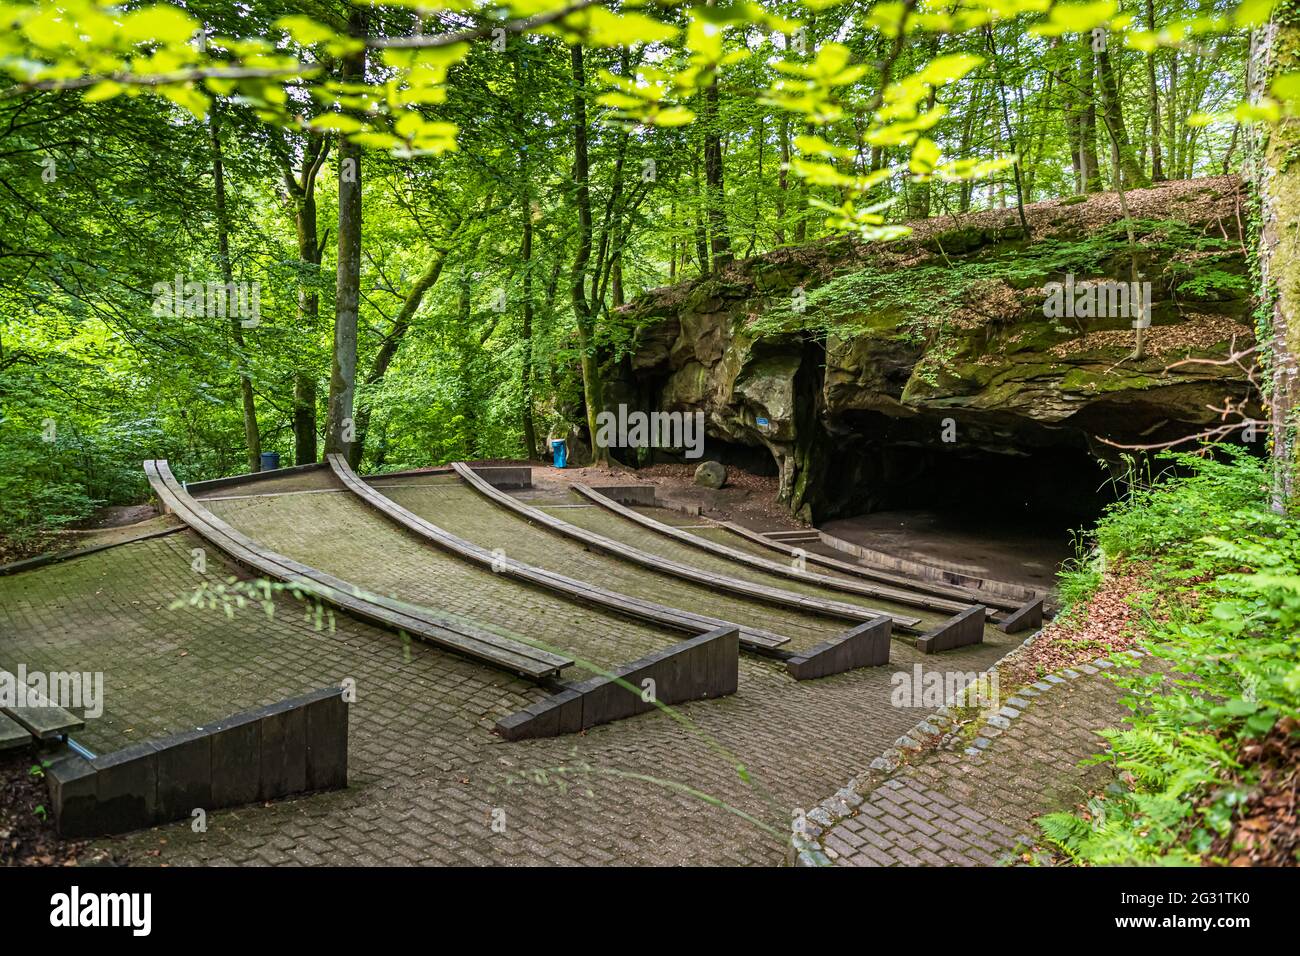 The amphitheater "Breechkaul" was established in 1979 in a rock hollowed out in the Middle Ages for the purpose of extracting millstones. There are held in the summer much attended concerts of all kinds. Berdorf, Luxembourg Stock Photo